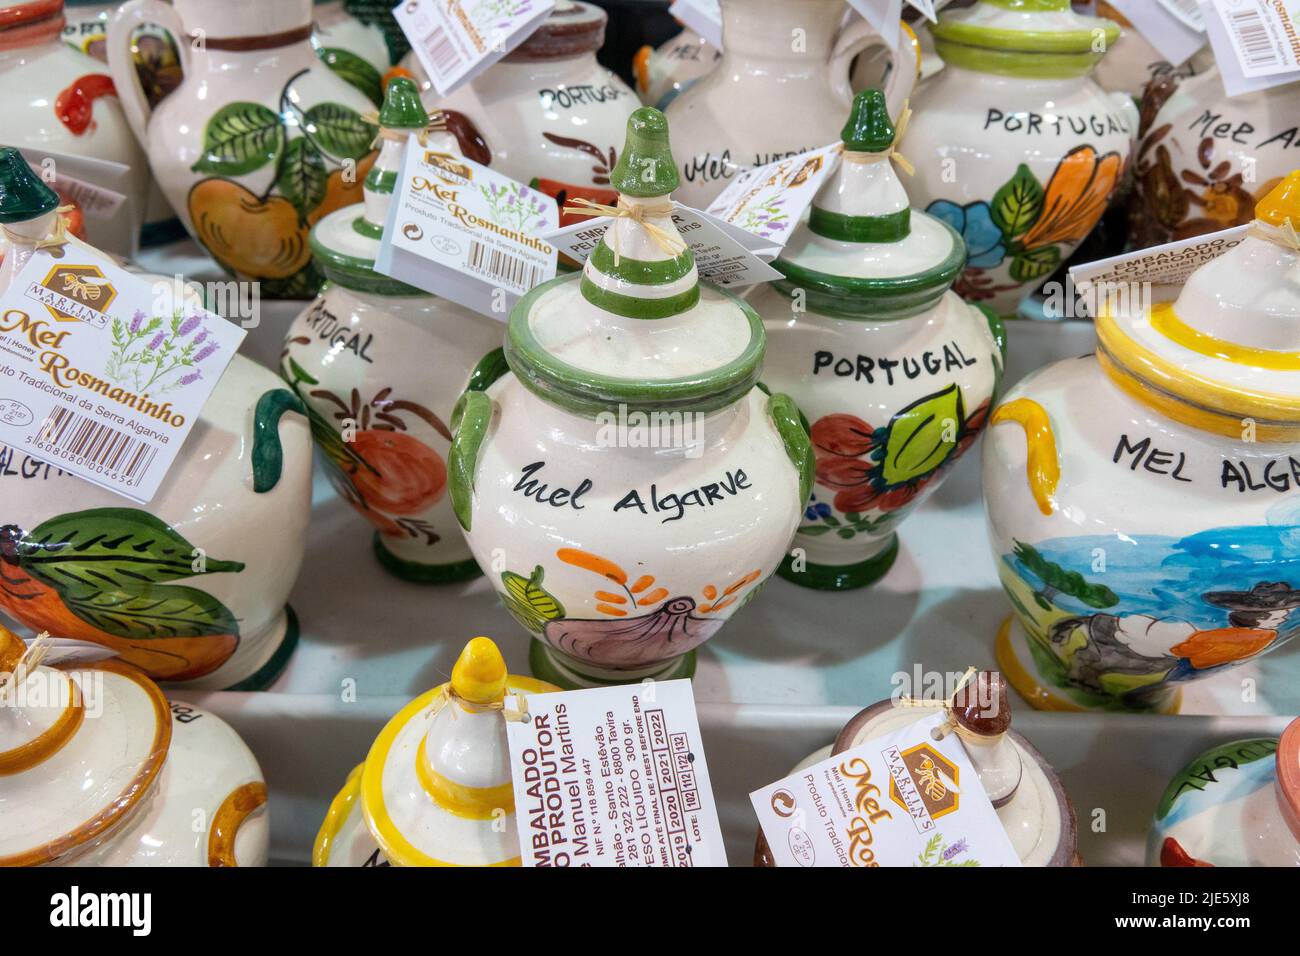 Portuguese Lavender Honey For Sale In Traditional Portuguese Decorative Earthenware Pots Hand Painted With Mel Algarve And Portugal Tourist Souvenirs Stock Photo